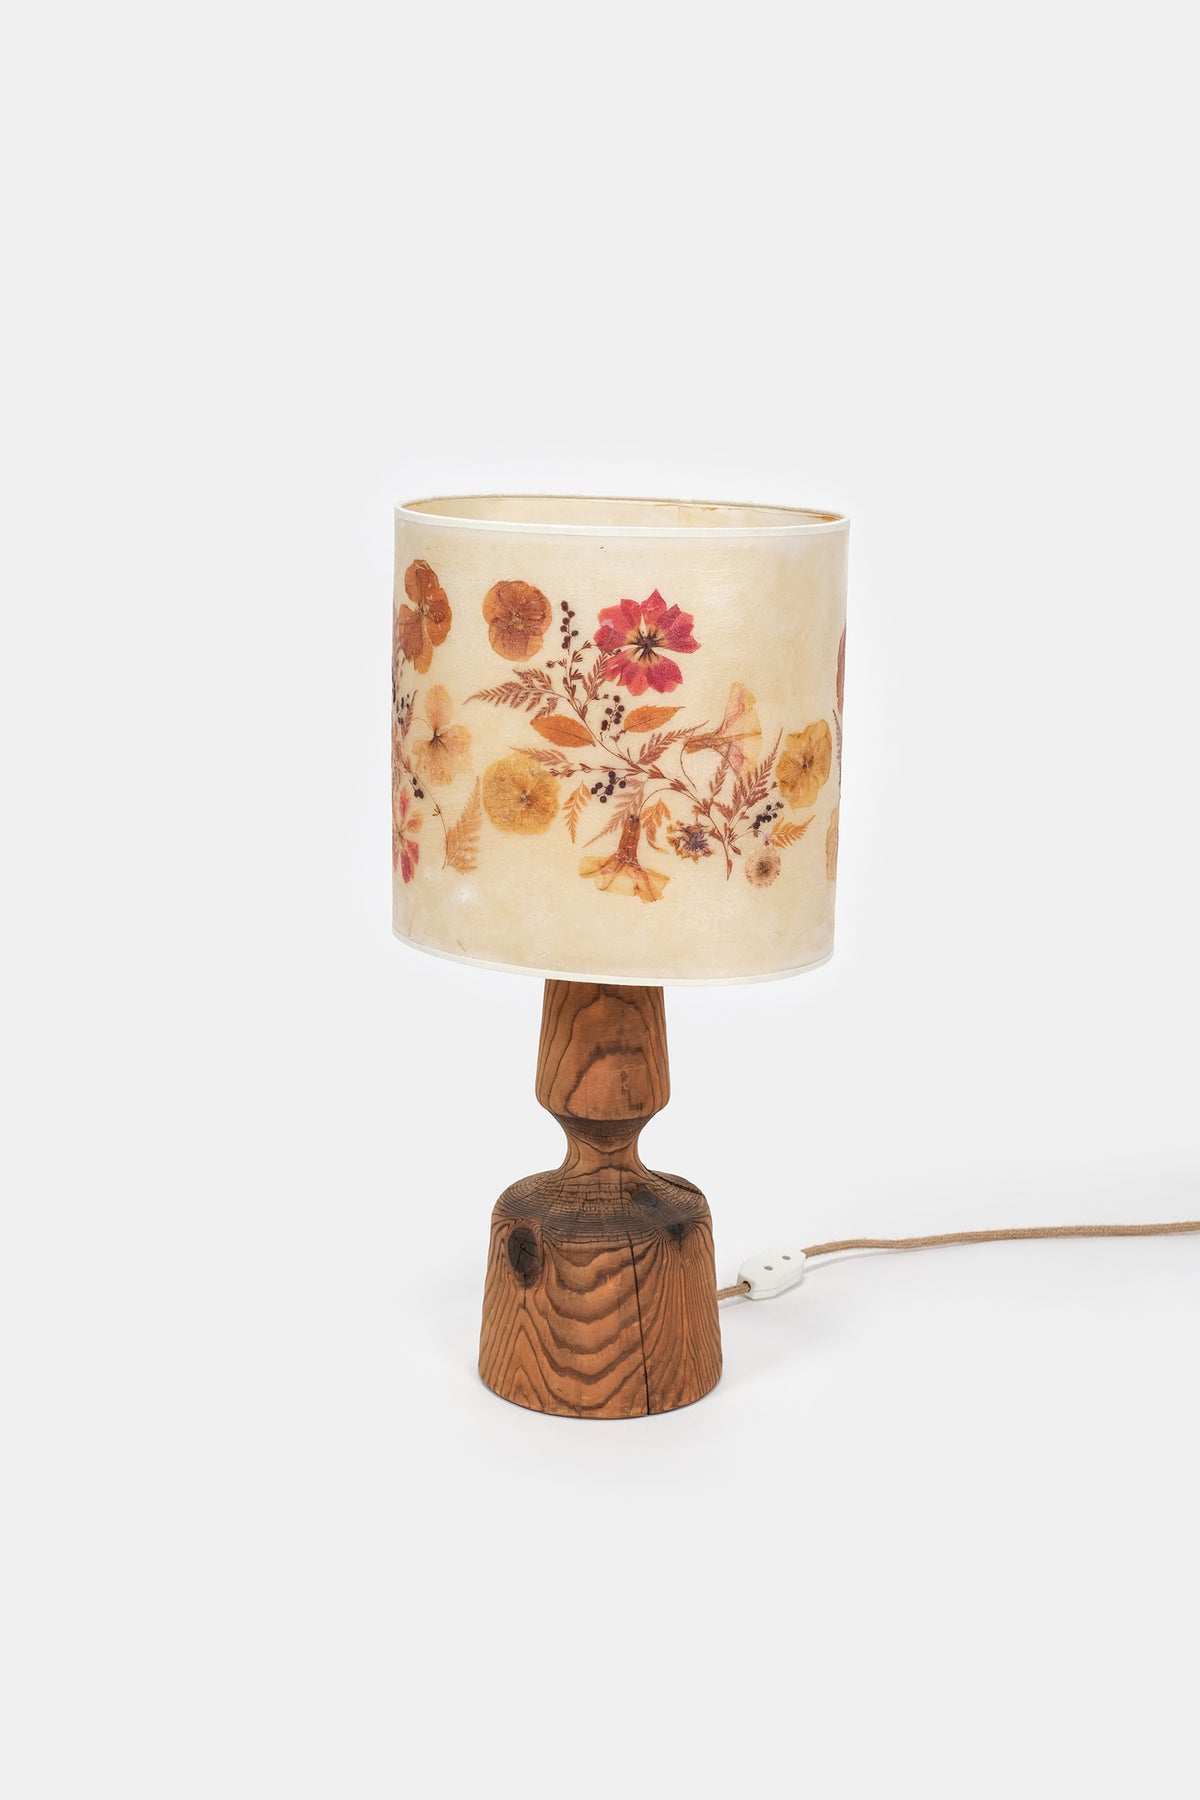 Naturalistic Table Lamp, France, 70s